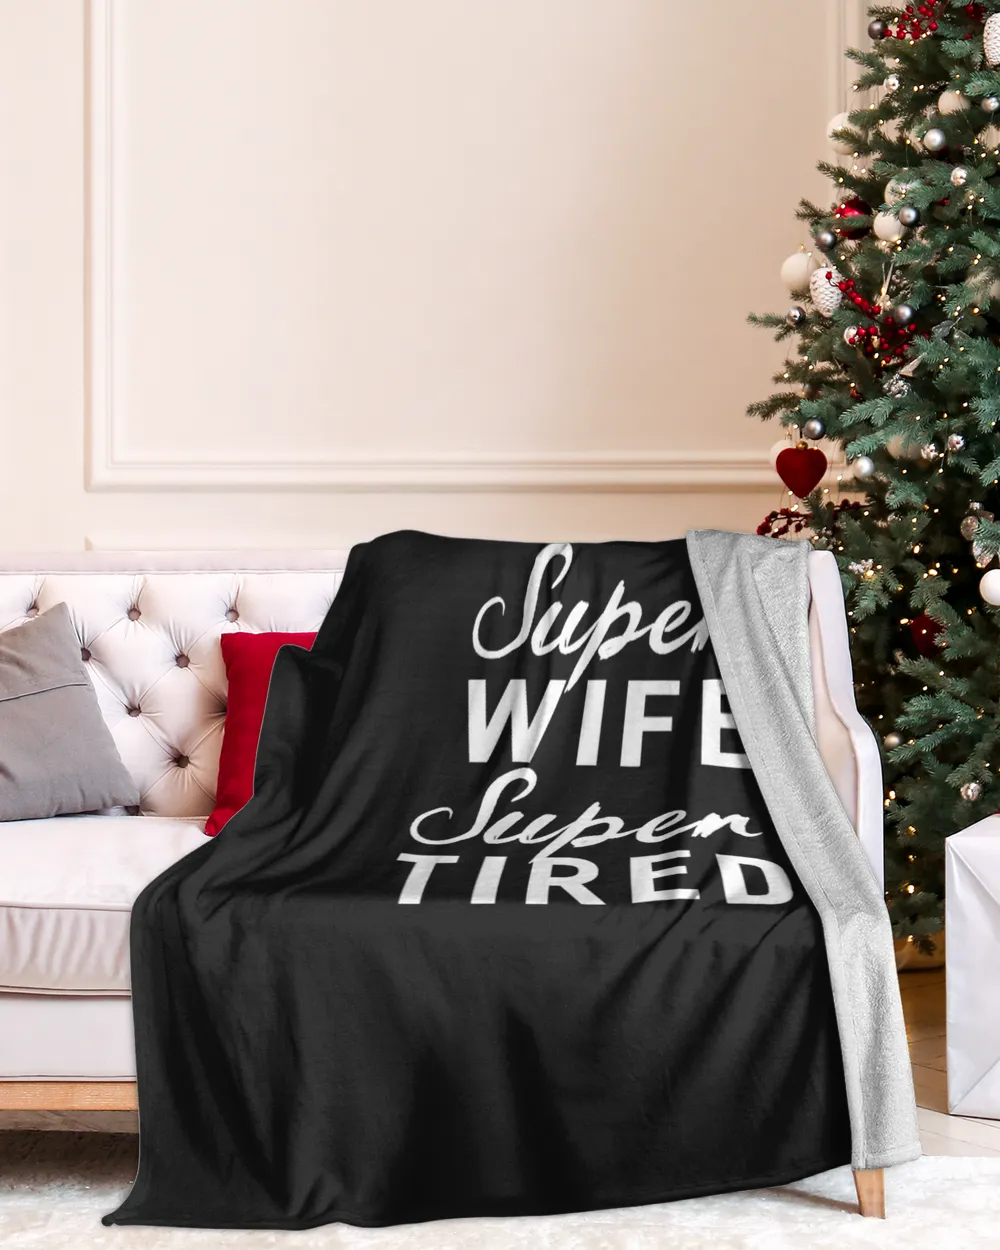 Super Mom Super Wife Super Tired Women Great Gifts T-shirt